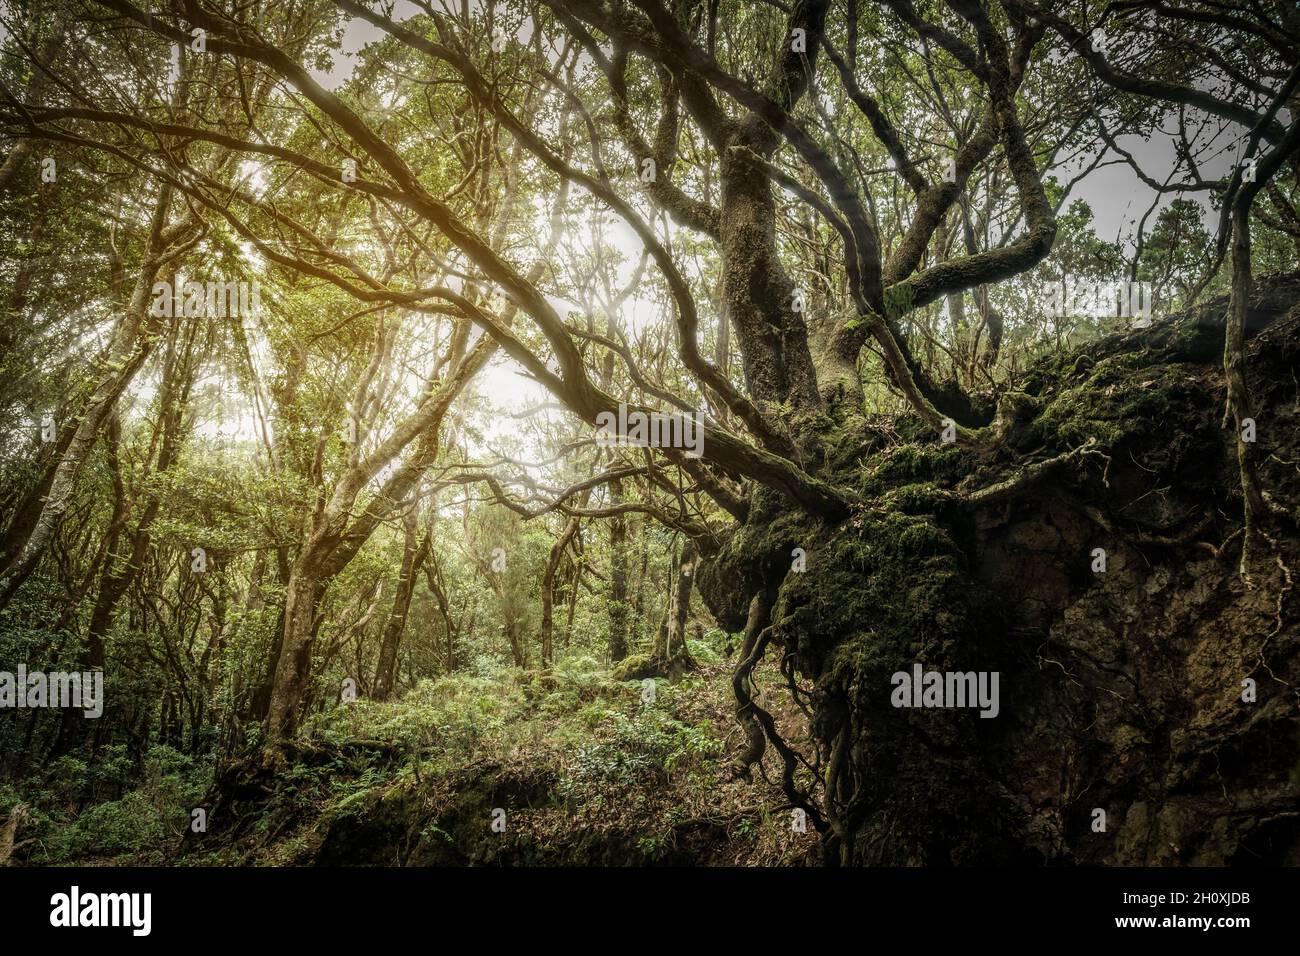 Mystic forest landscape, overgrown trees and roots, Tenerife Stock Photo